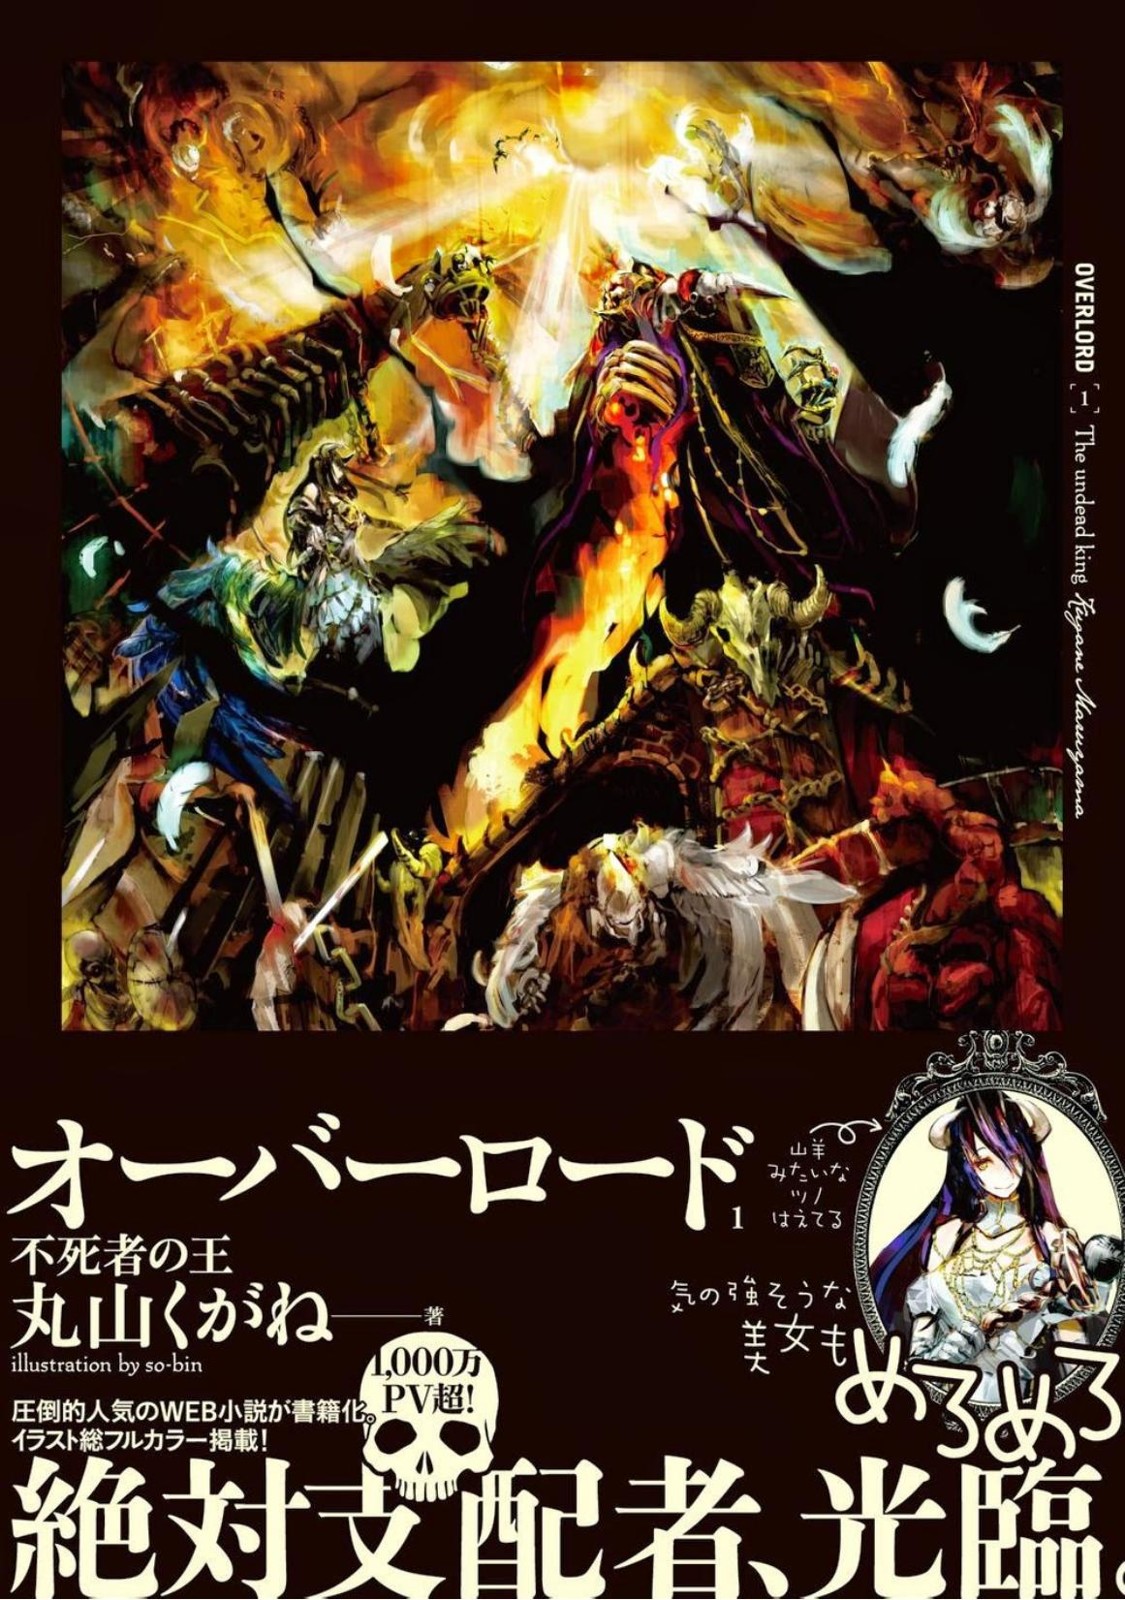 Overlord Vol.1